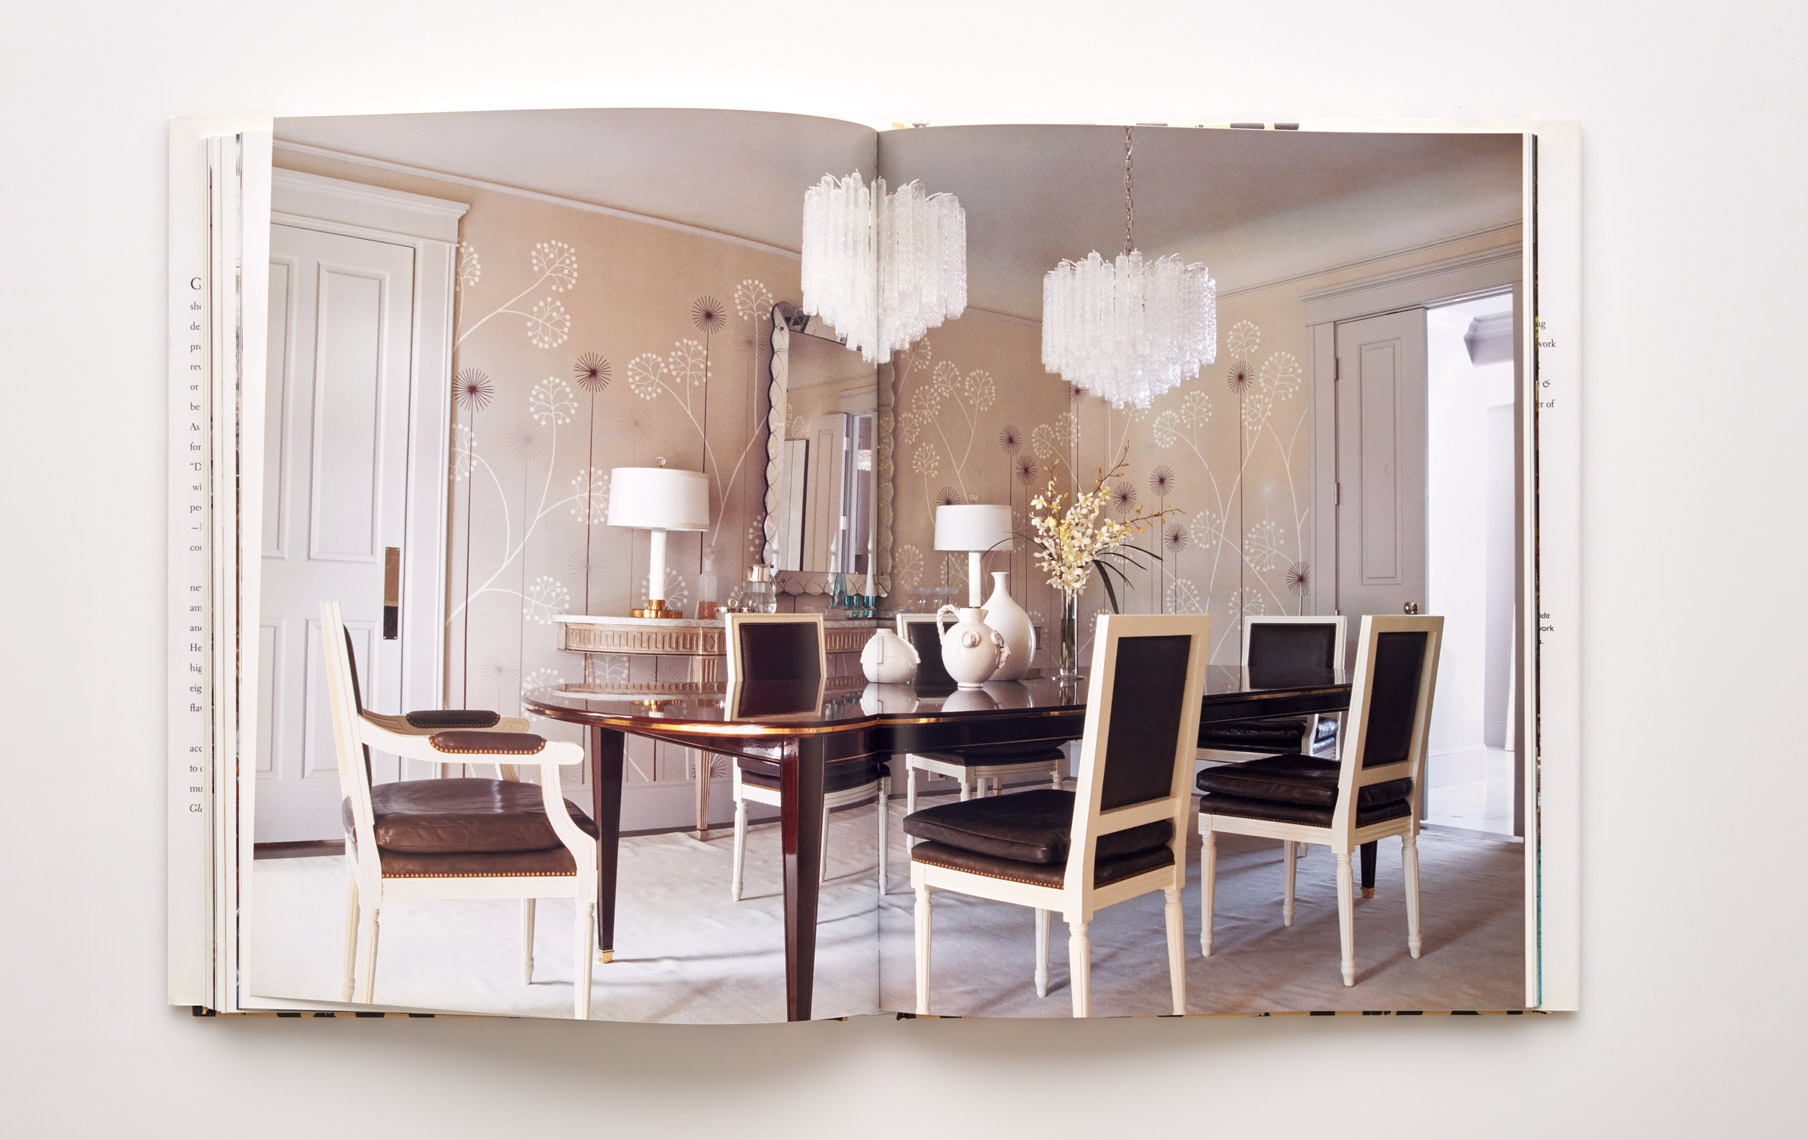 Stephen Karlisch Jan Showers Glamorous Rooms Eclectic Dining 